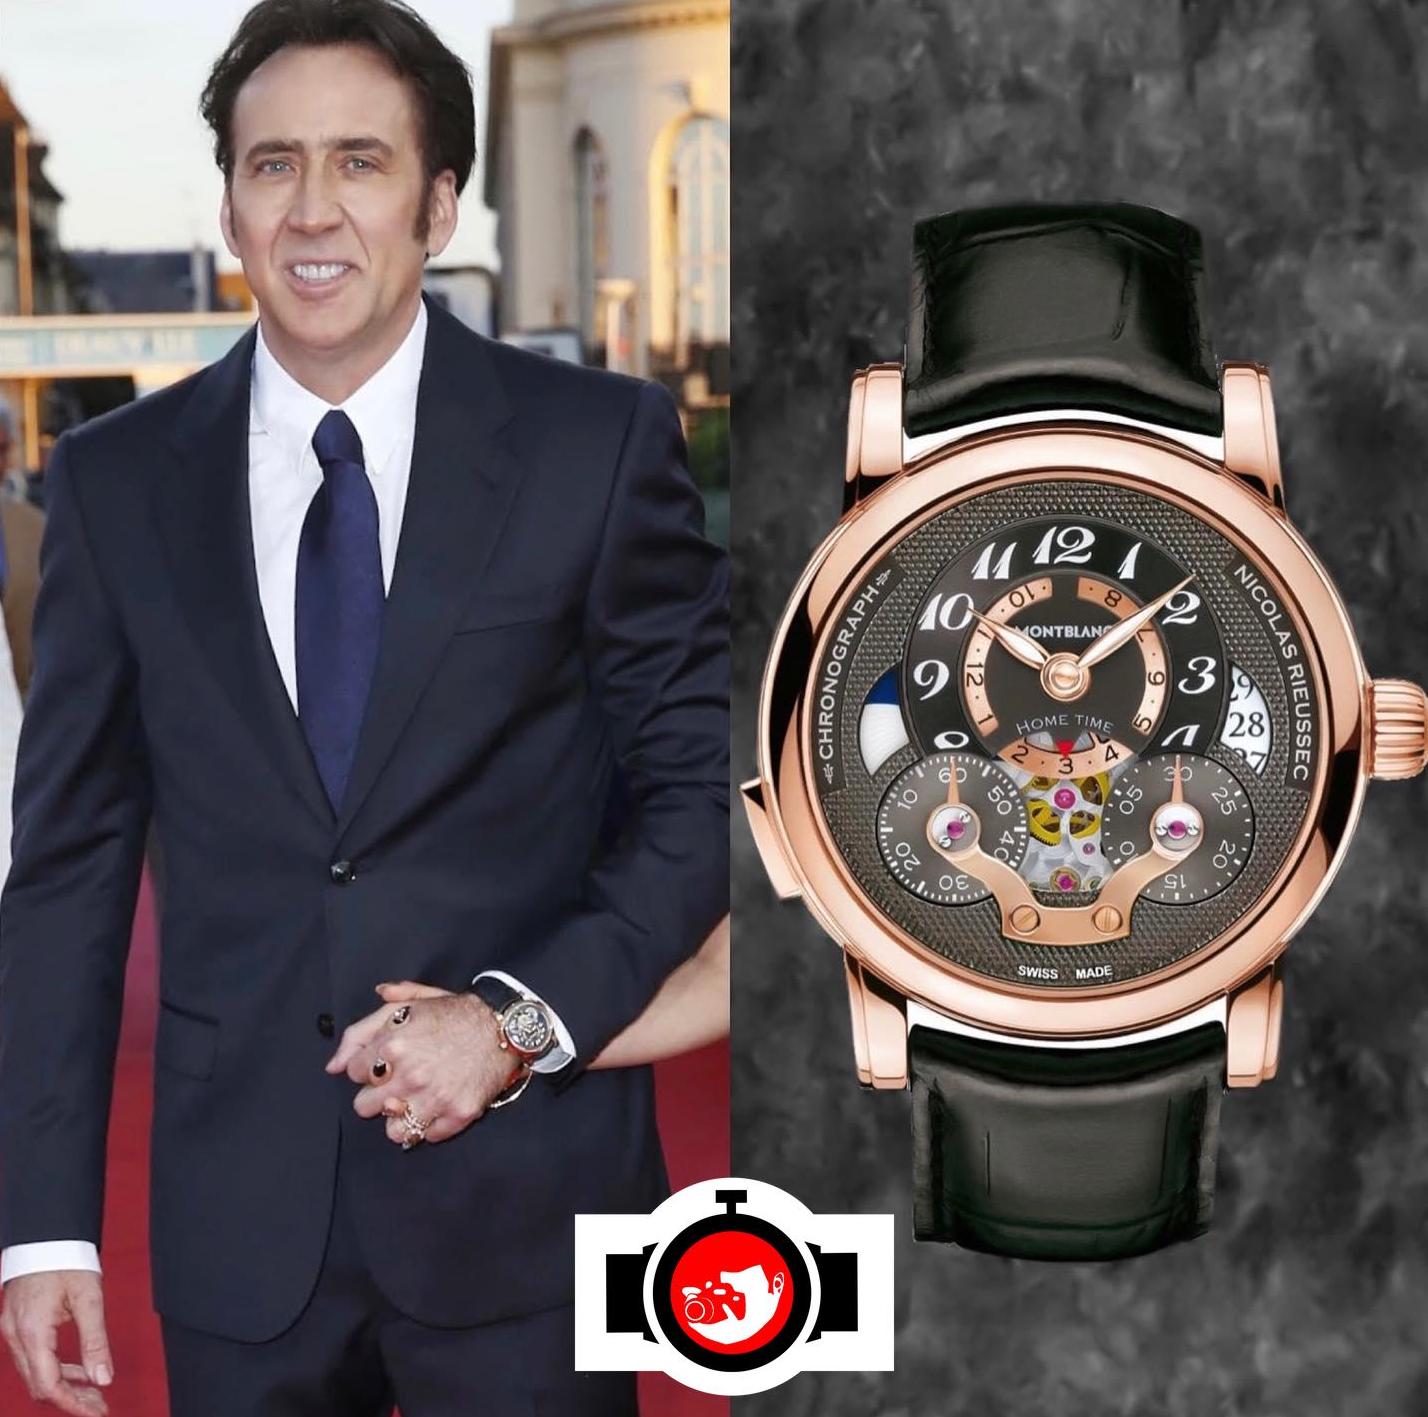 actor Nicolas Cage spotted wearing a Montblanc 107067